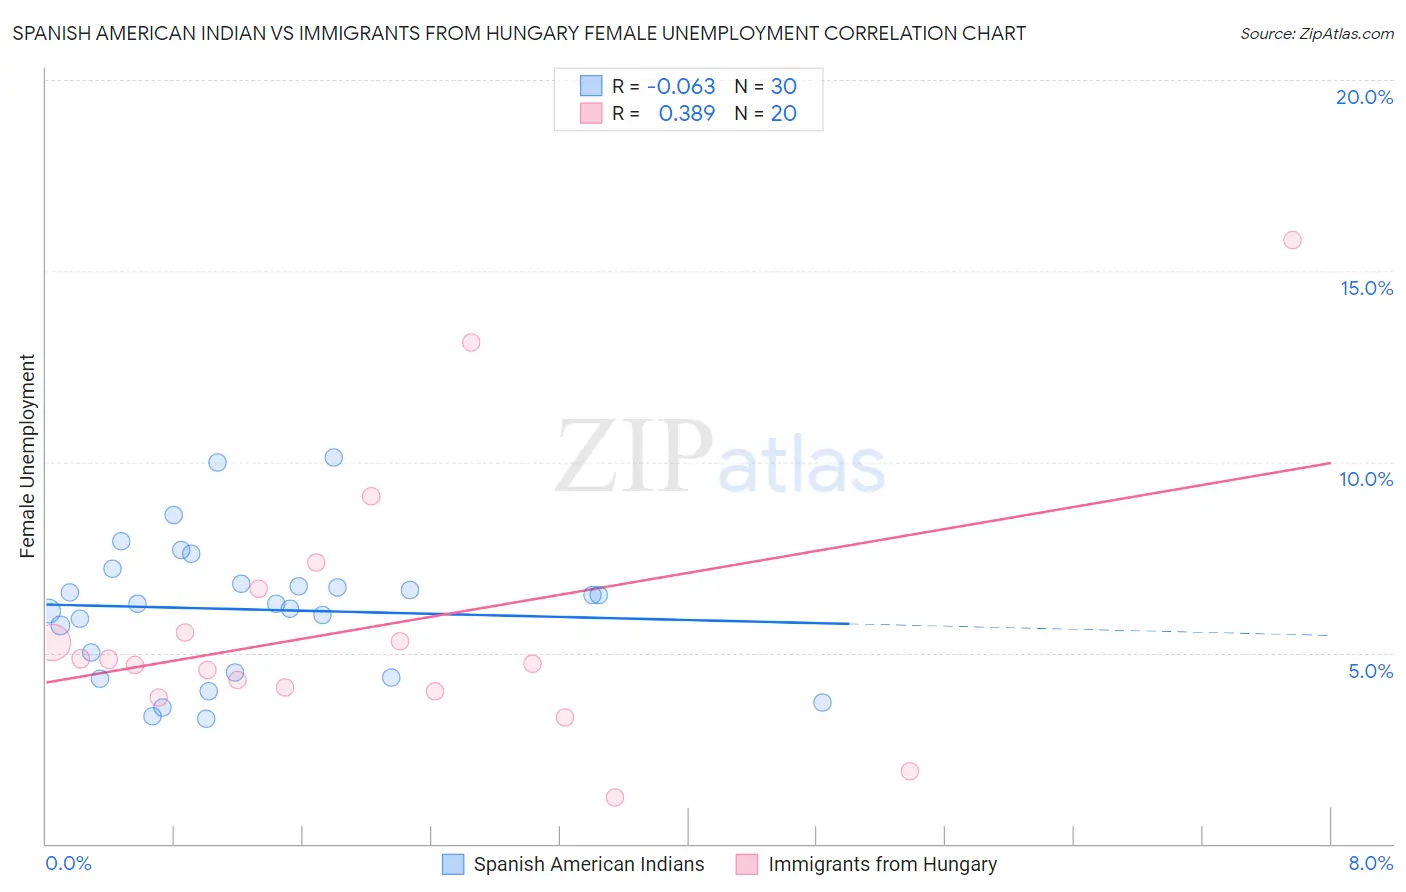 Spanish American Indian vs Immigrants from Hungary Female Unemployment